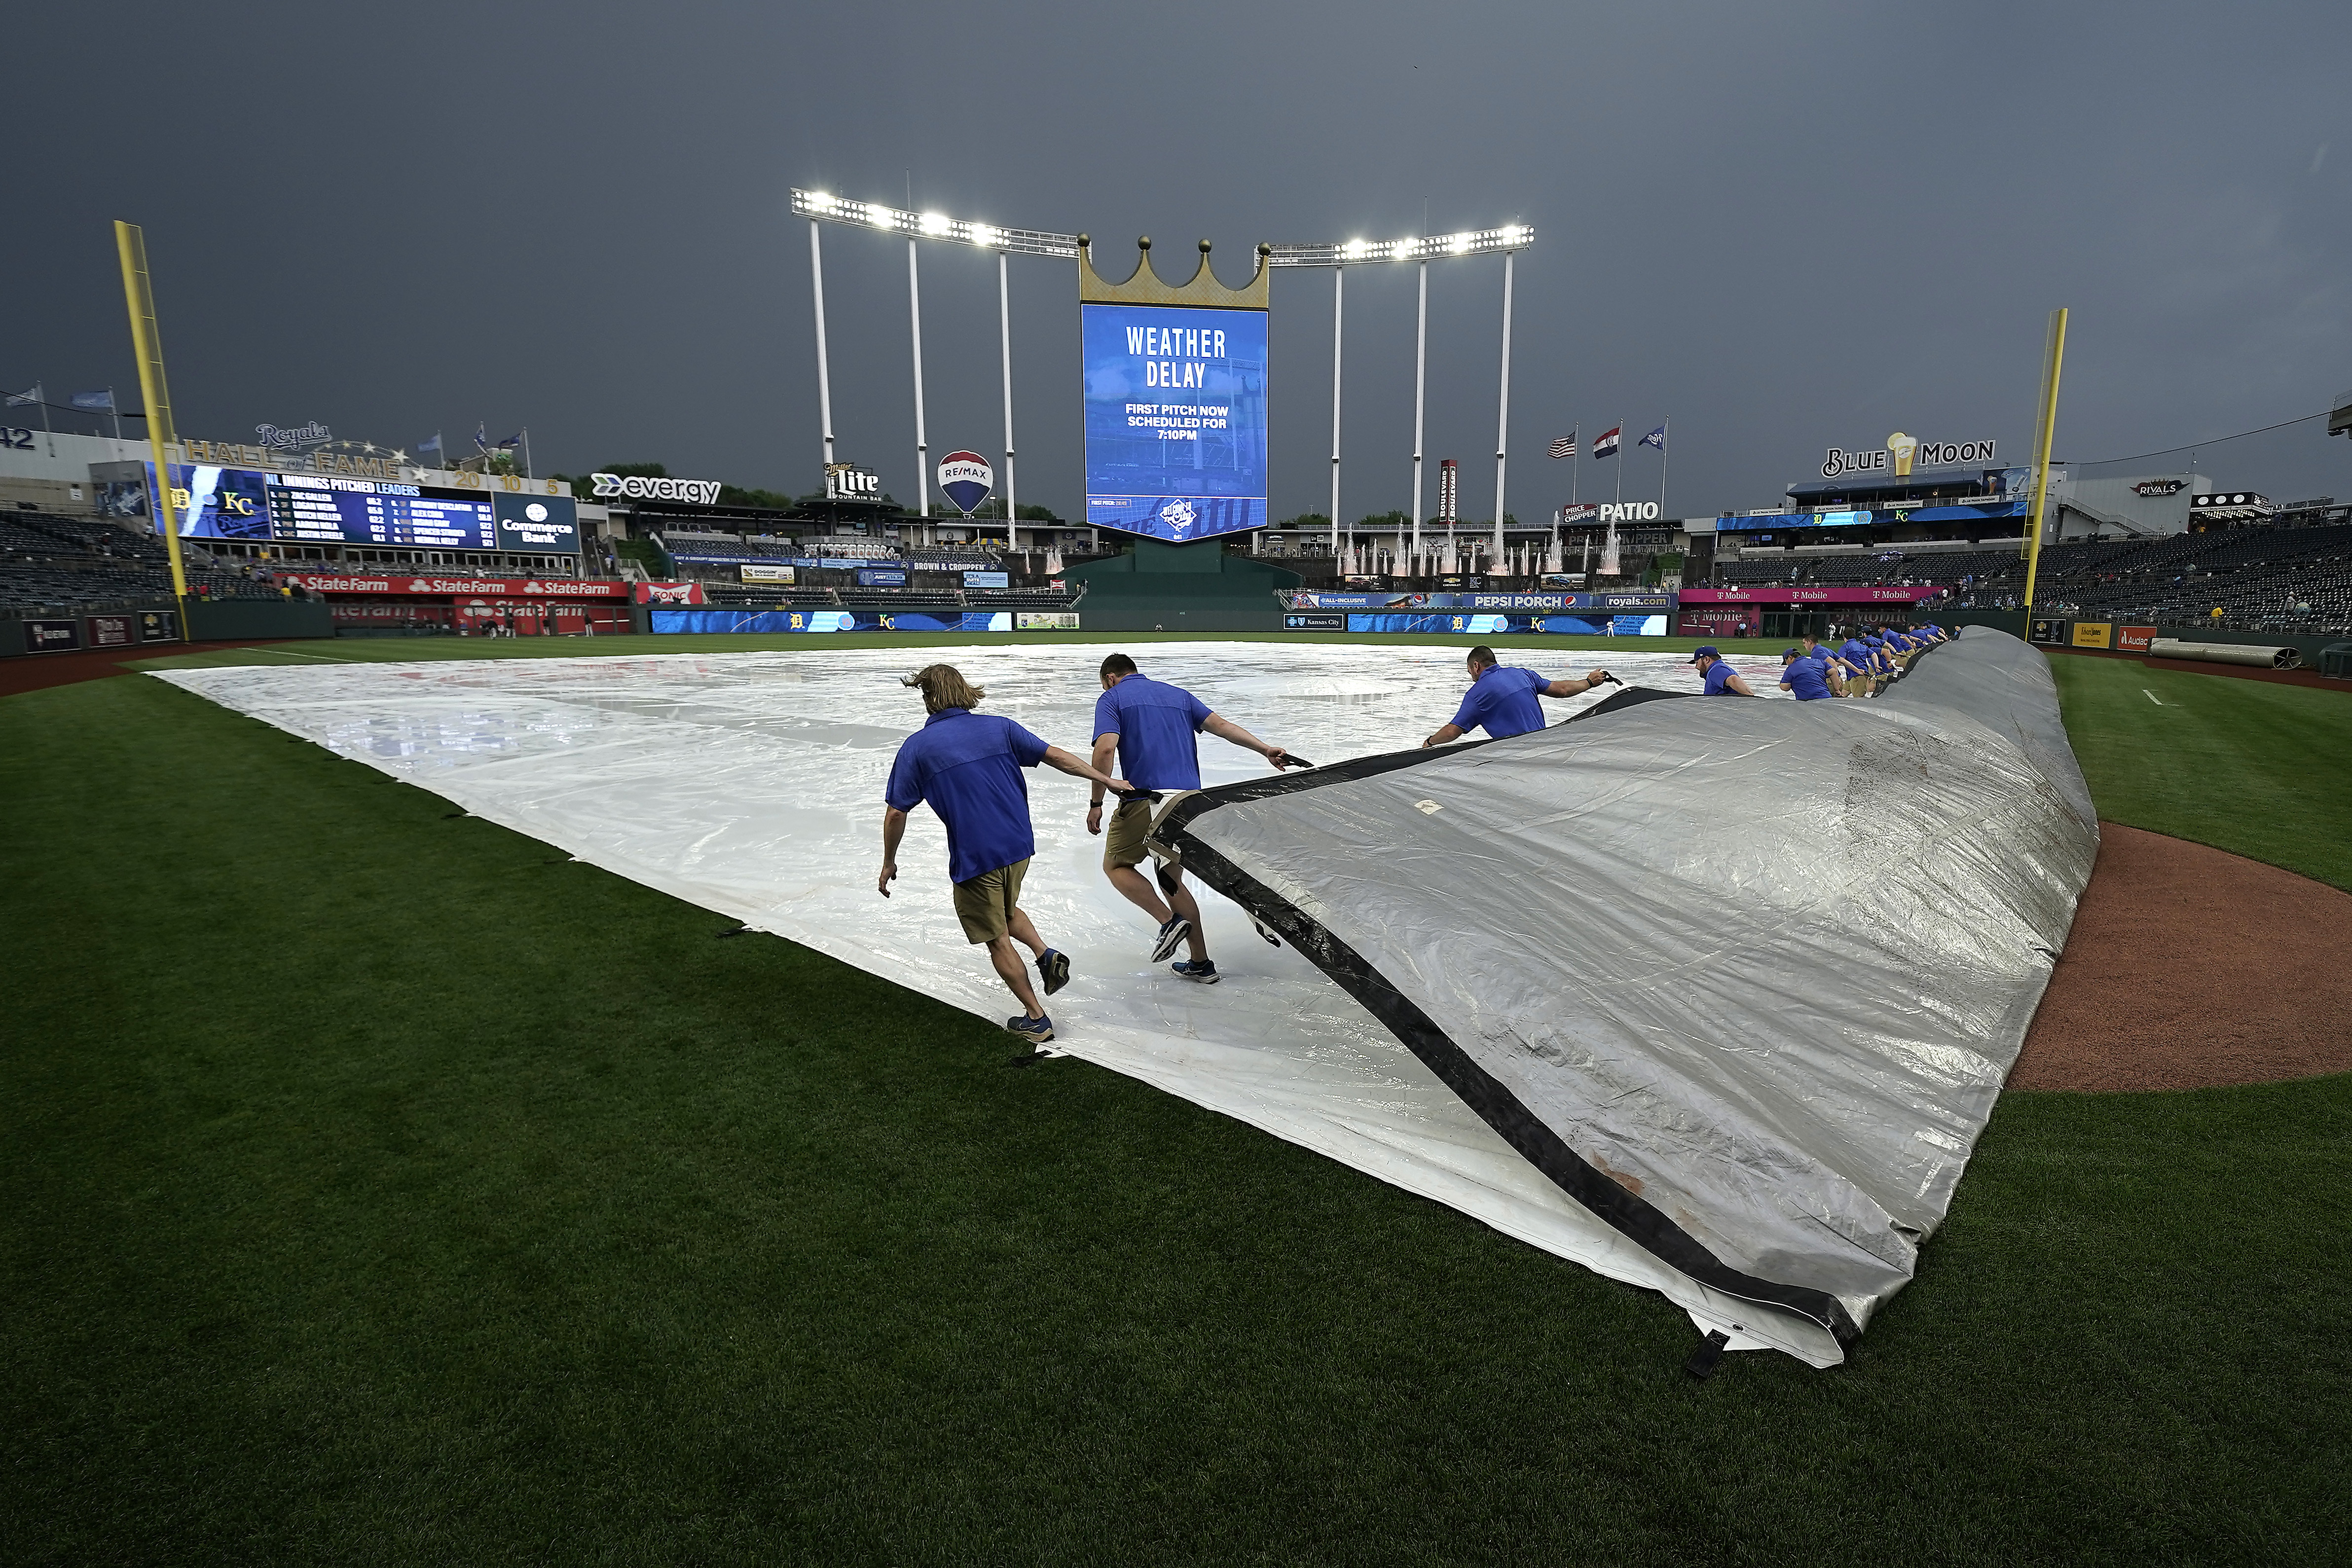 Royals employee union protests working conditions at Kauffman Stadium